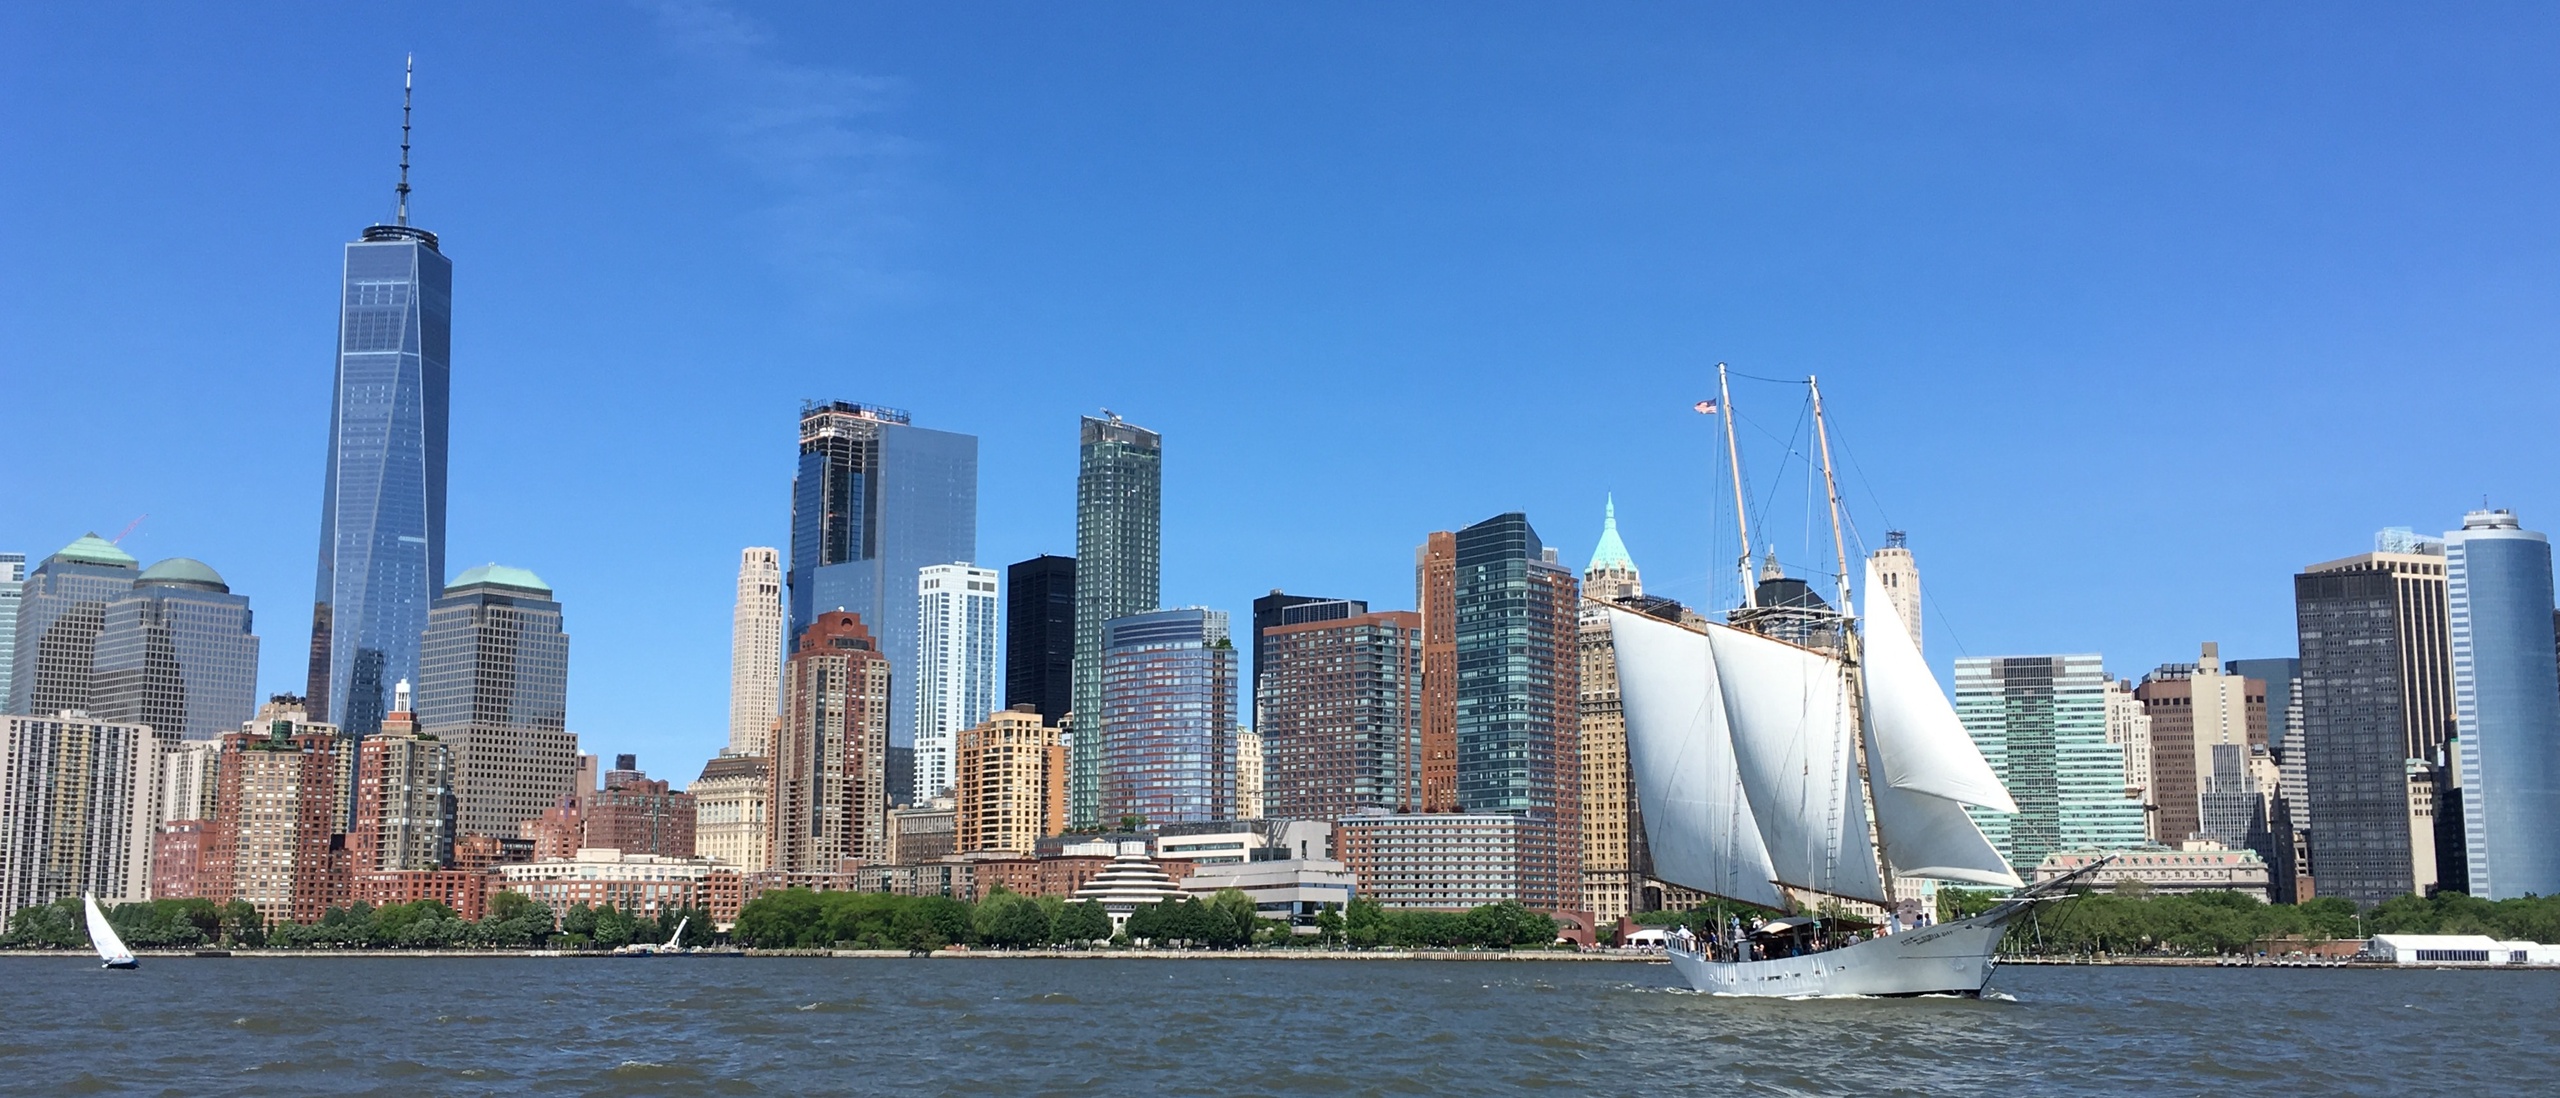 Sail Through NYC Harbor with Snacks & Bar On Board (Up to  15 Passengers) image 5